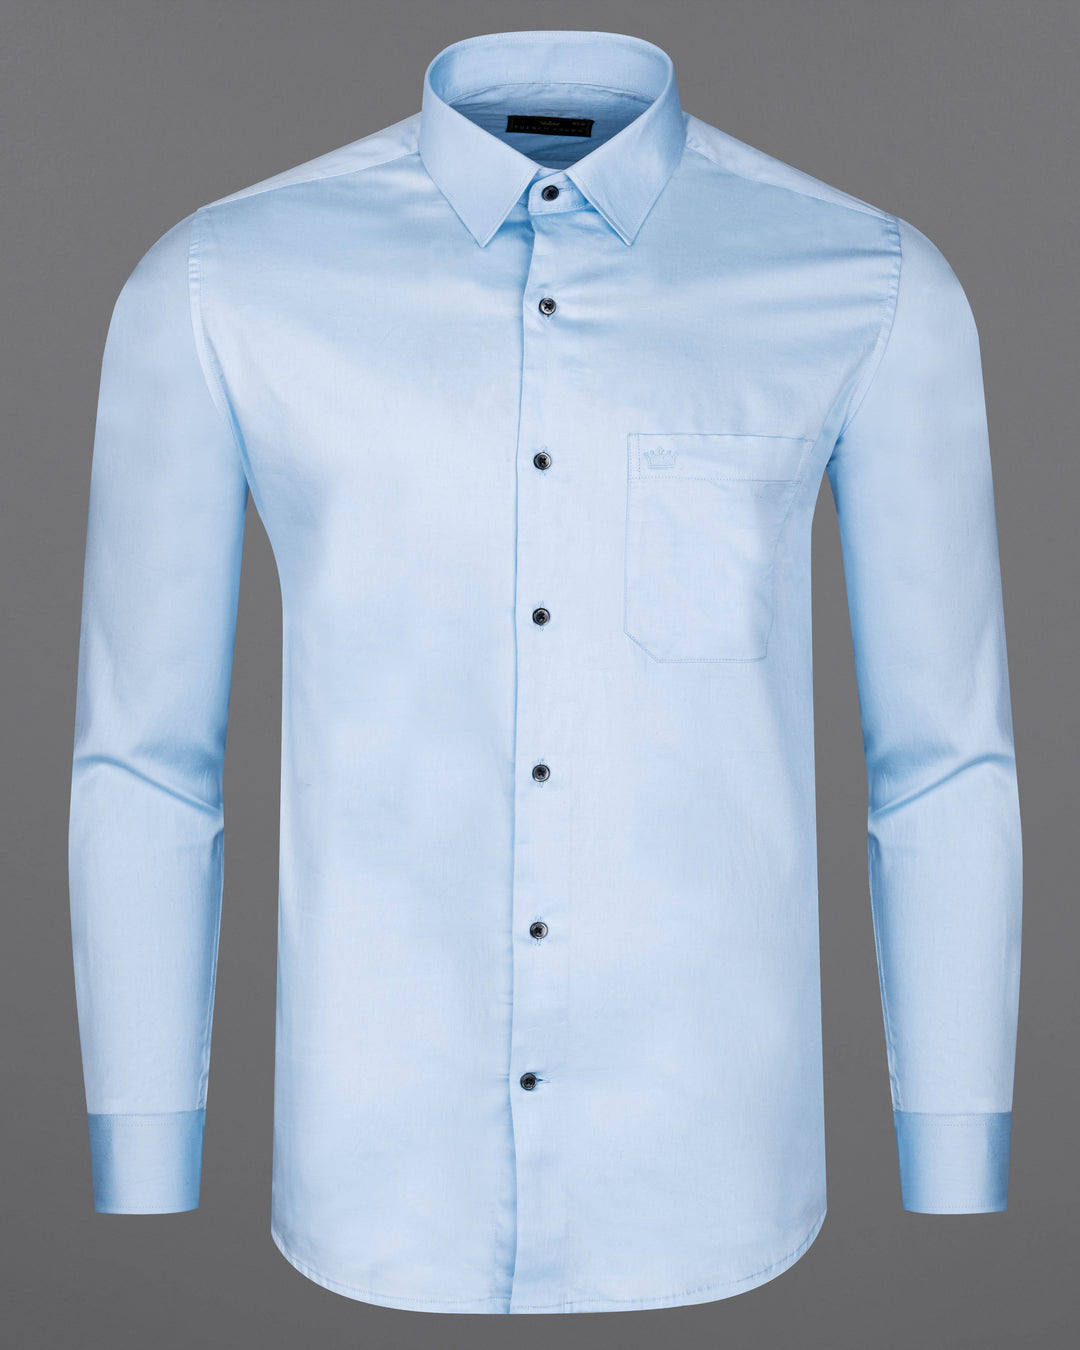 Pearl Fab Shirt and Pant Fabric Combo Set for Men (Light Blue Shirt and  Denim Blue Pants) : Amazon.in: Clothing & Accessories